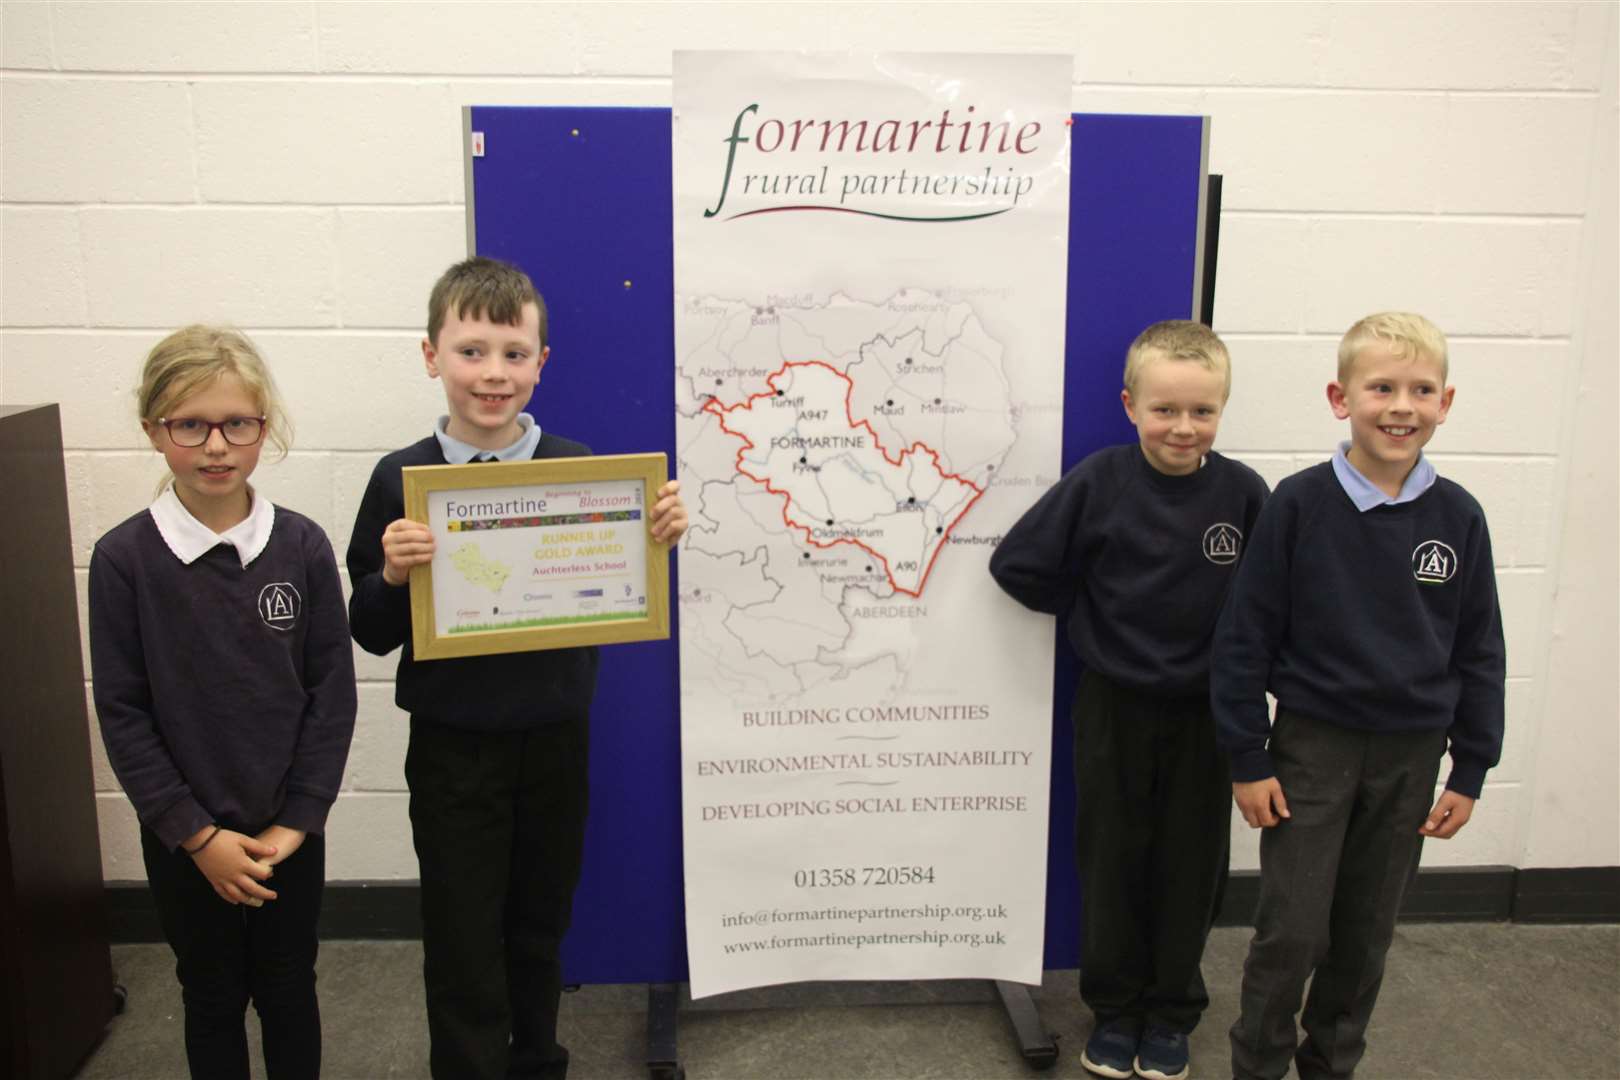 Auchterless Primary School took the runners up spot.